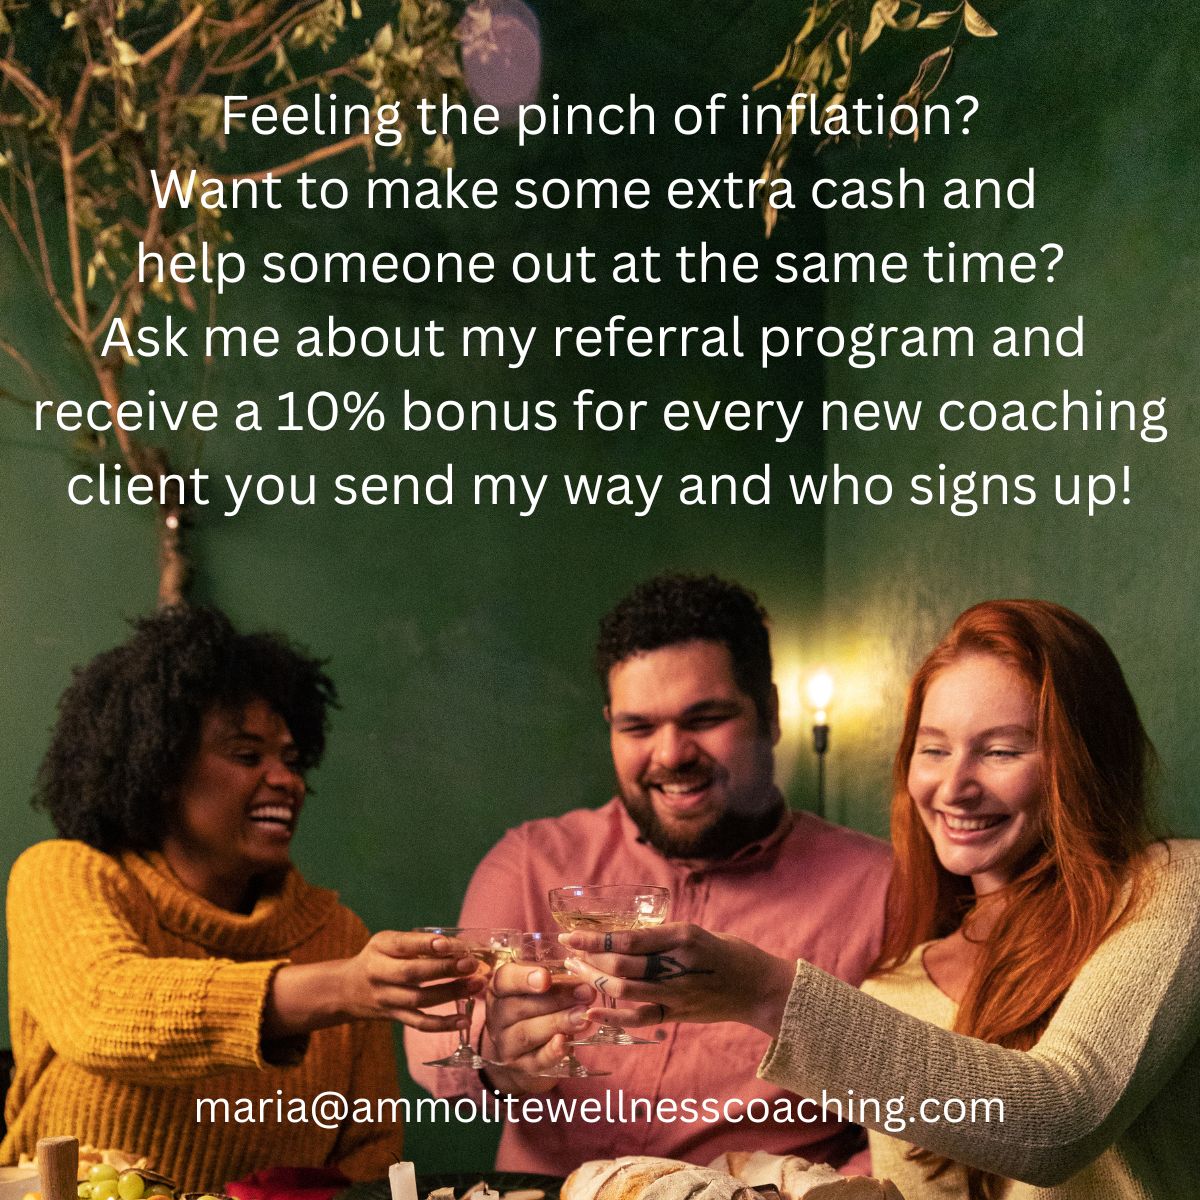 Giving 10% referral bonuses for any new coaching clients.